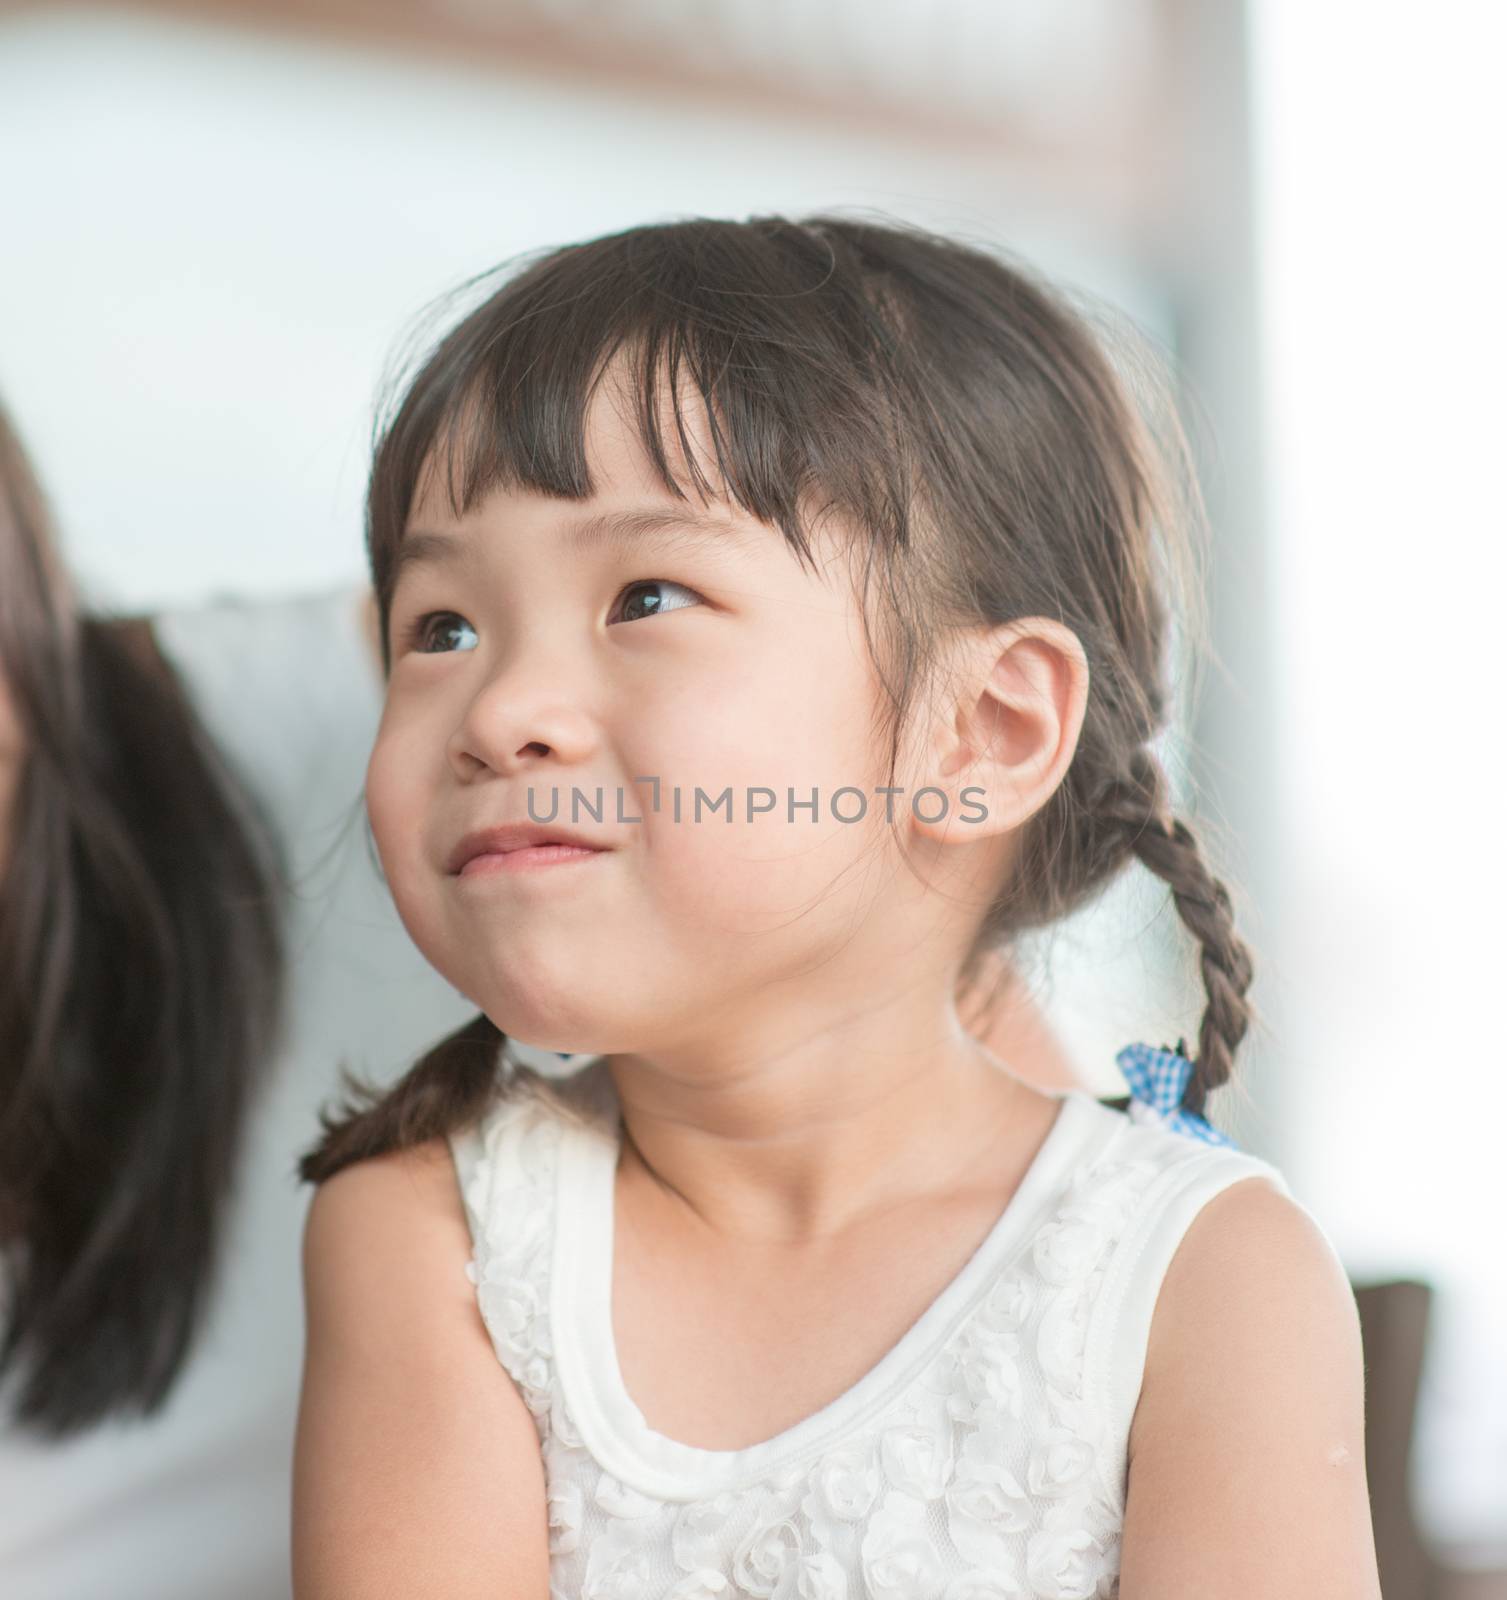 Candid shoot of people in cafeteria. Little girl with various face expression. Asian family outdoor lifestyle with natural light.